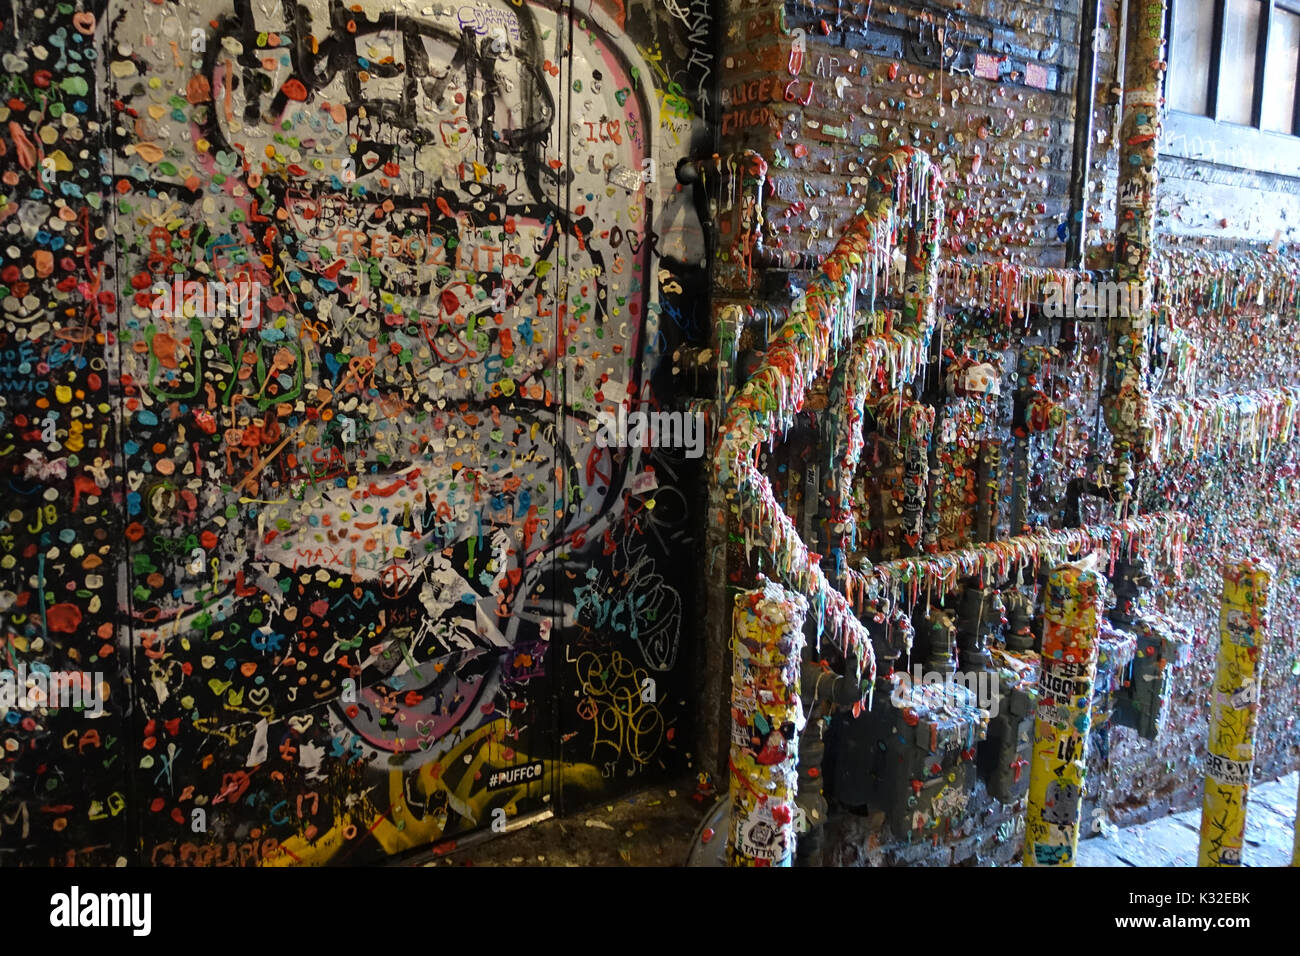 Seattle's Gum Wall - Pike Place Market has its share of odd wonders, and the nearby Gum Wall is no exception. Stock Photo